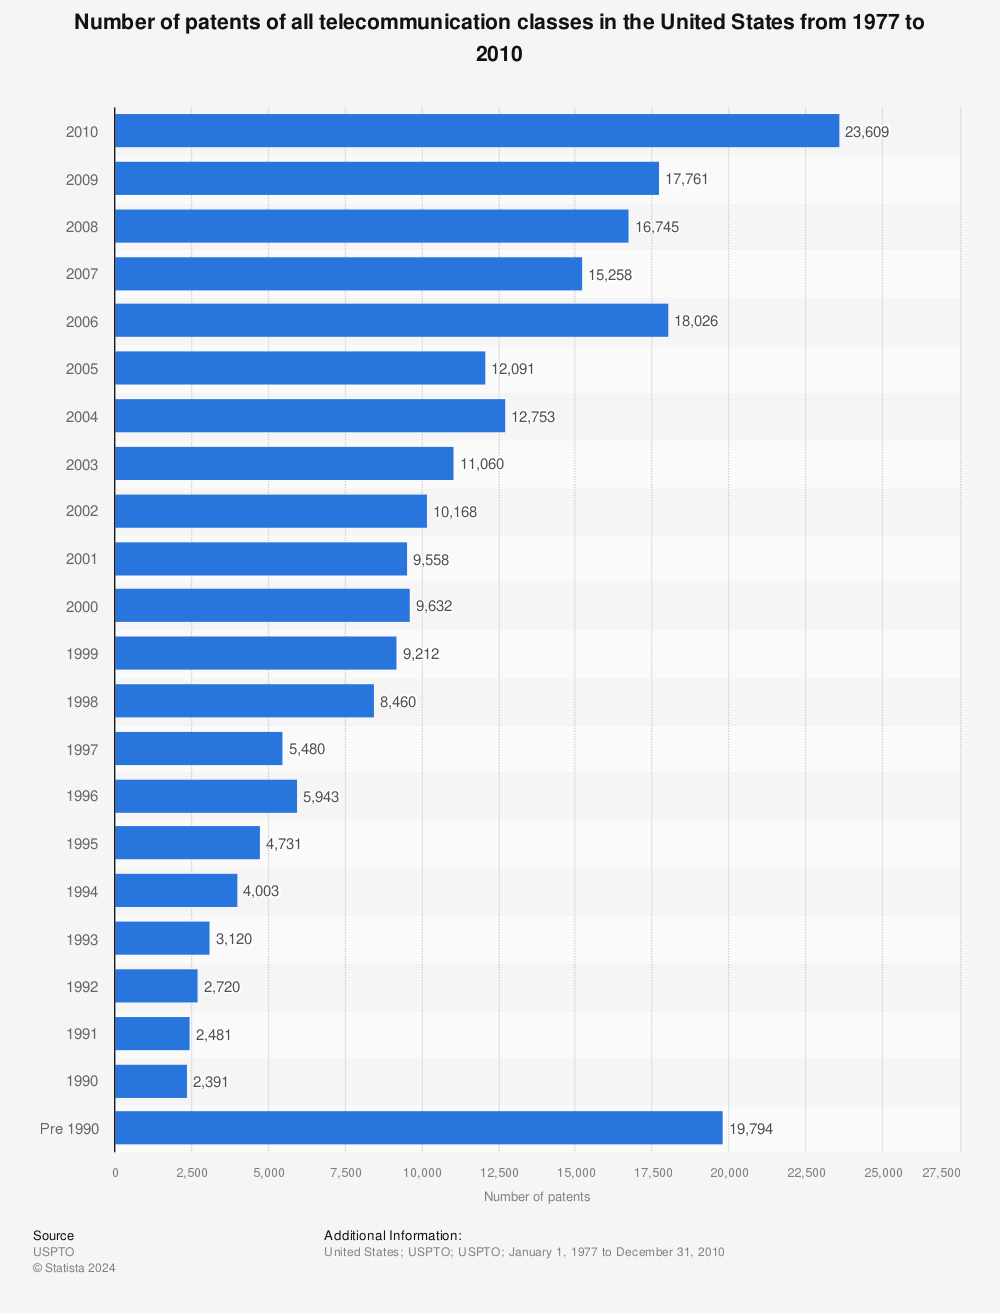 Statistic: Number of patents of all telecommunication classes in the United States from 1977 to 2010 | Statista